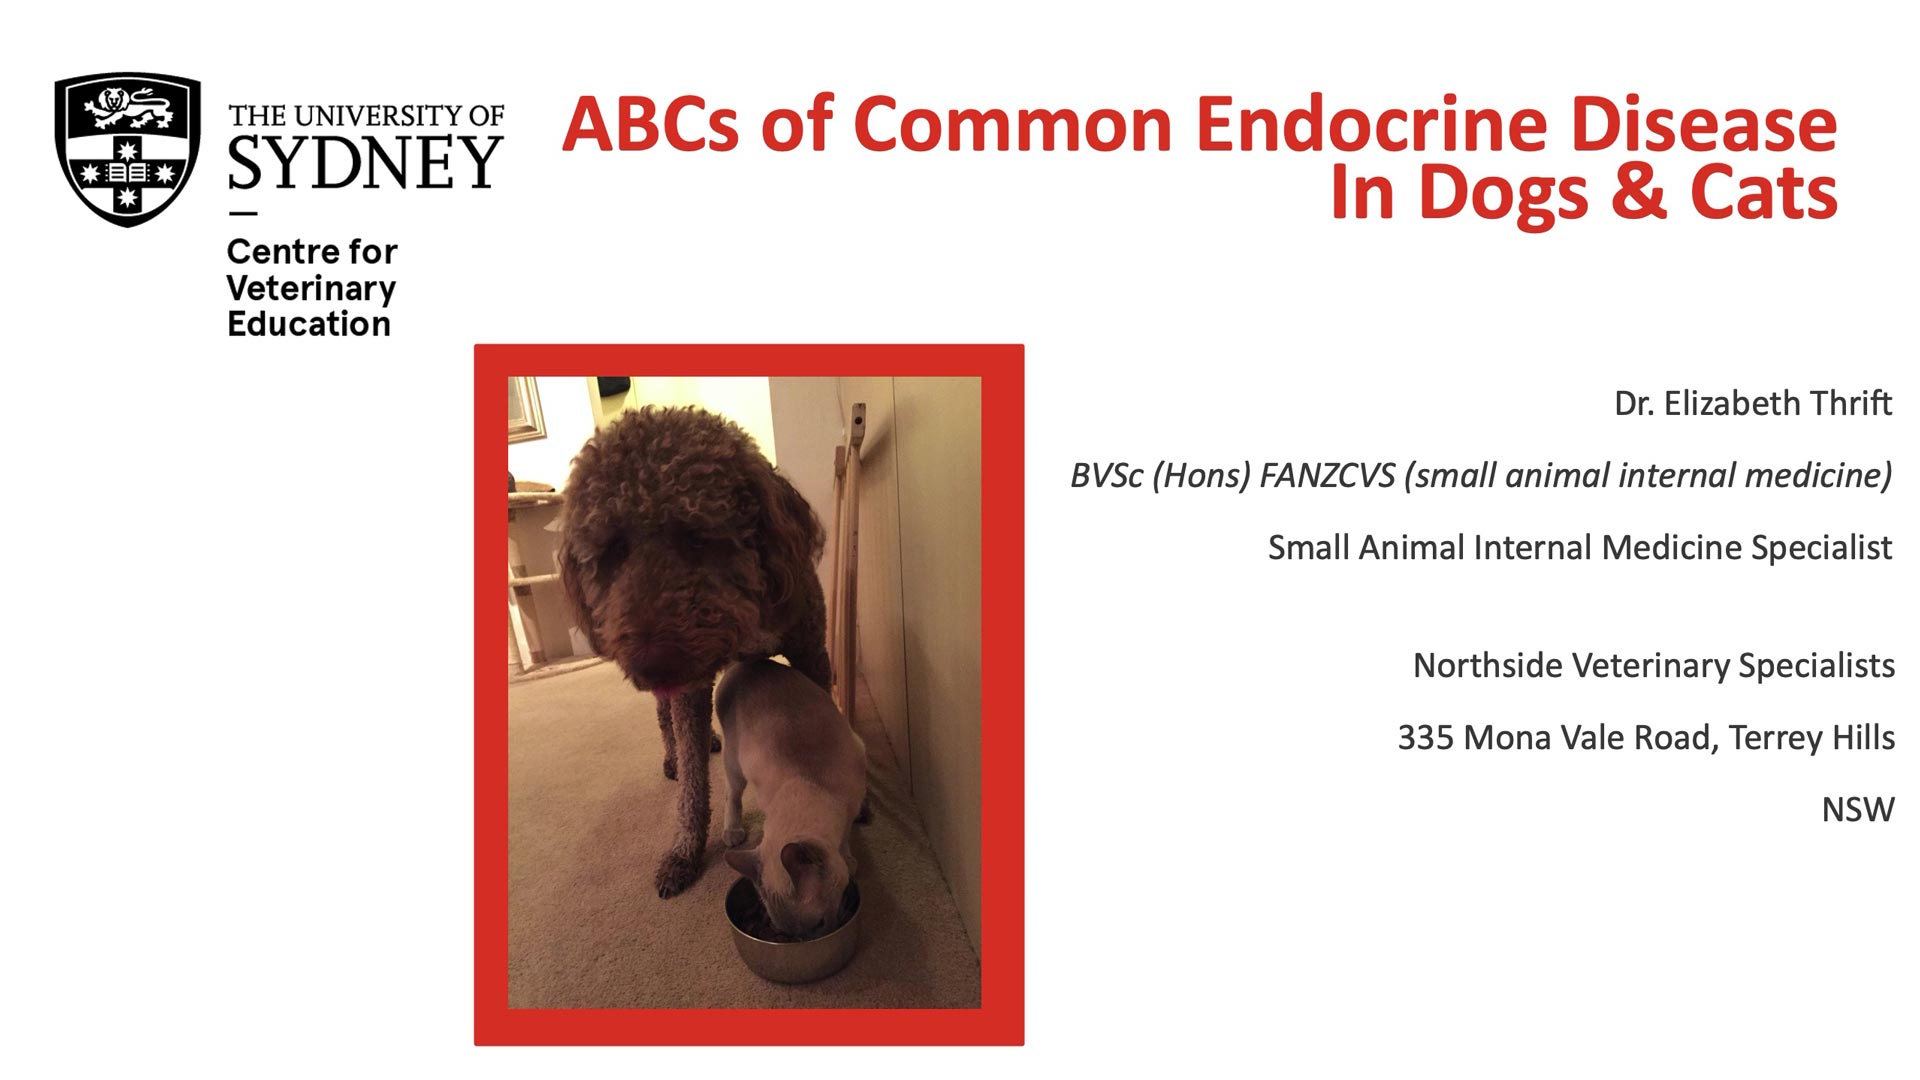 The ABCs of Common Endocrine Diseases in Dogs and Cats